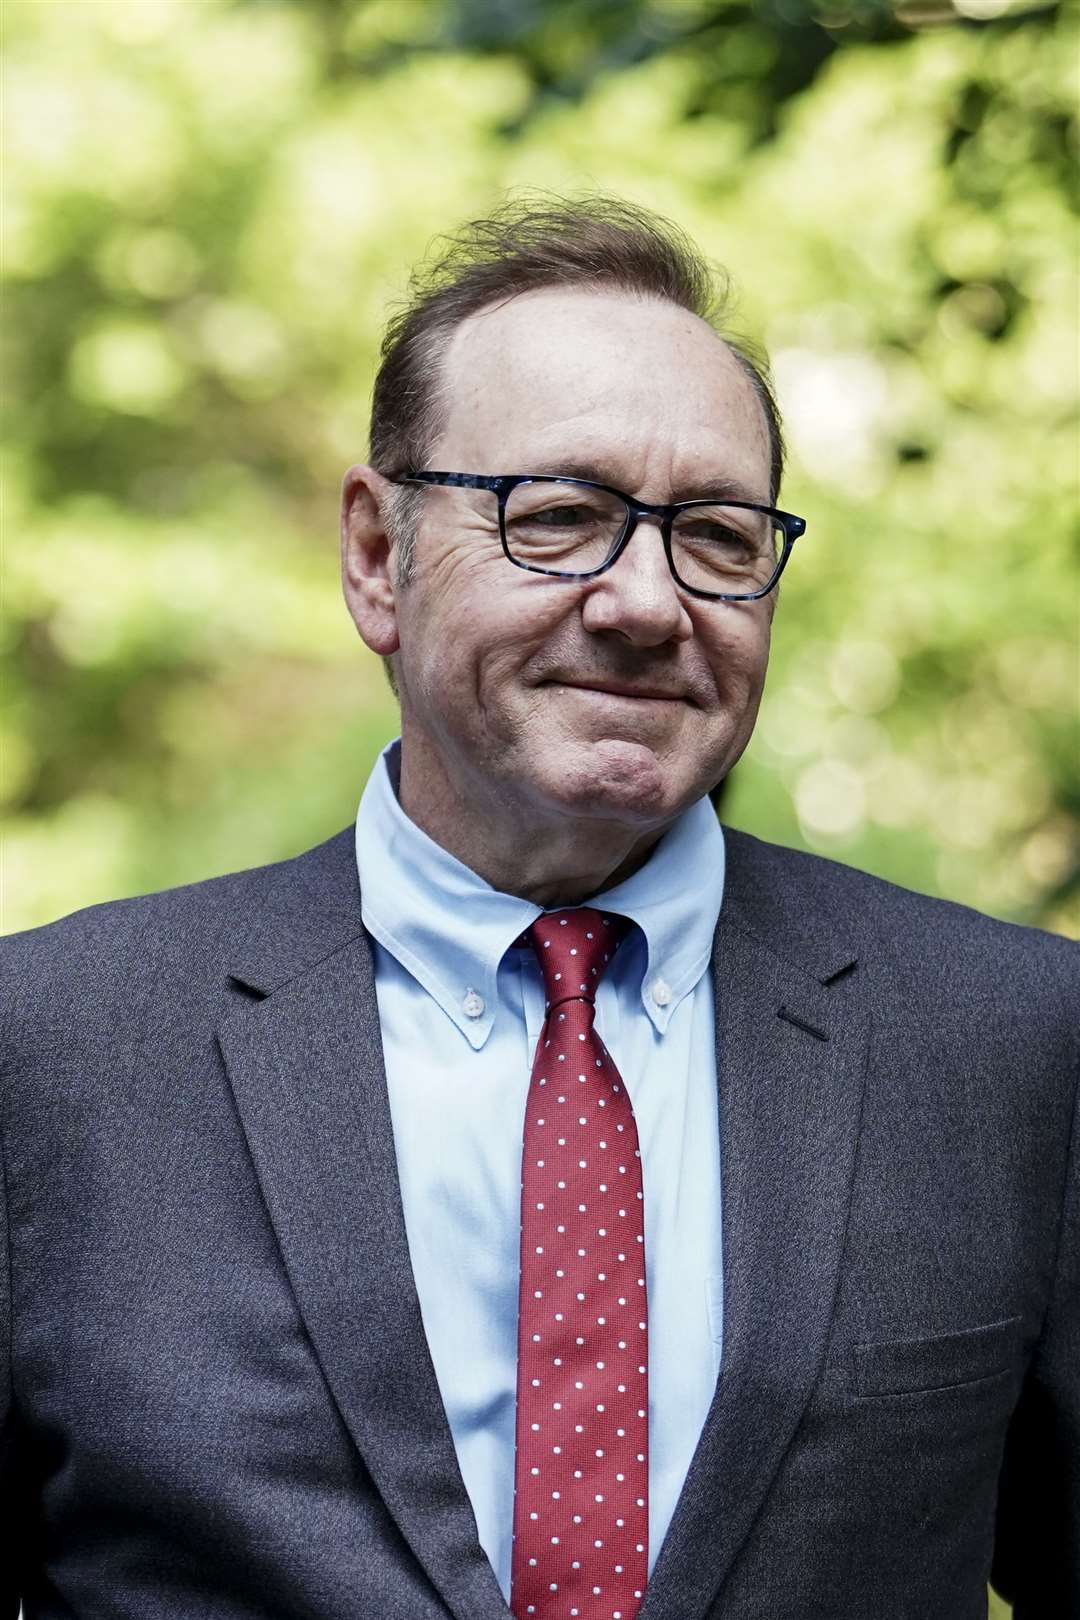 The witness said young good-looking men were warned about Spacey (Jordan Pettitt/PA)